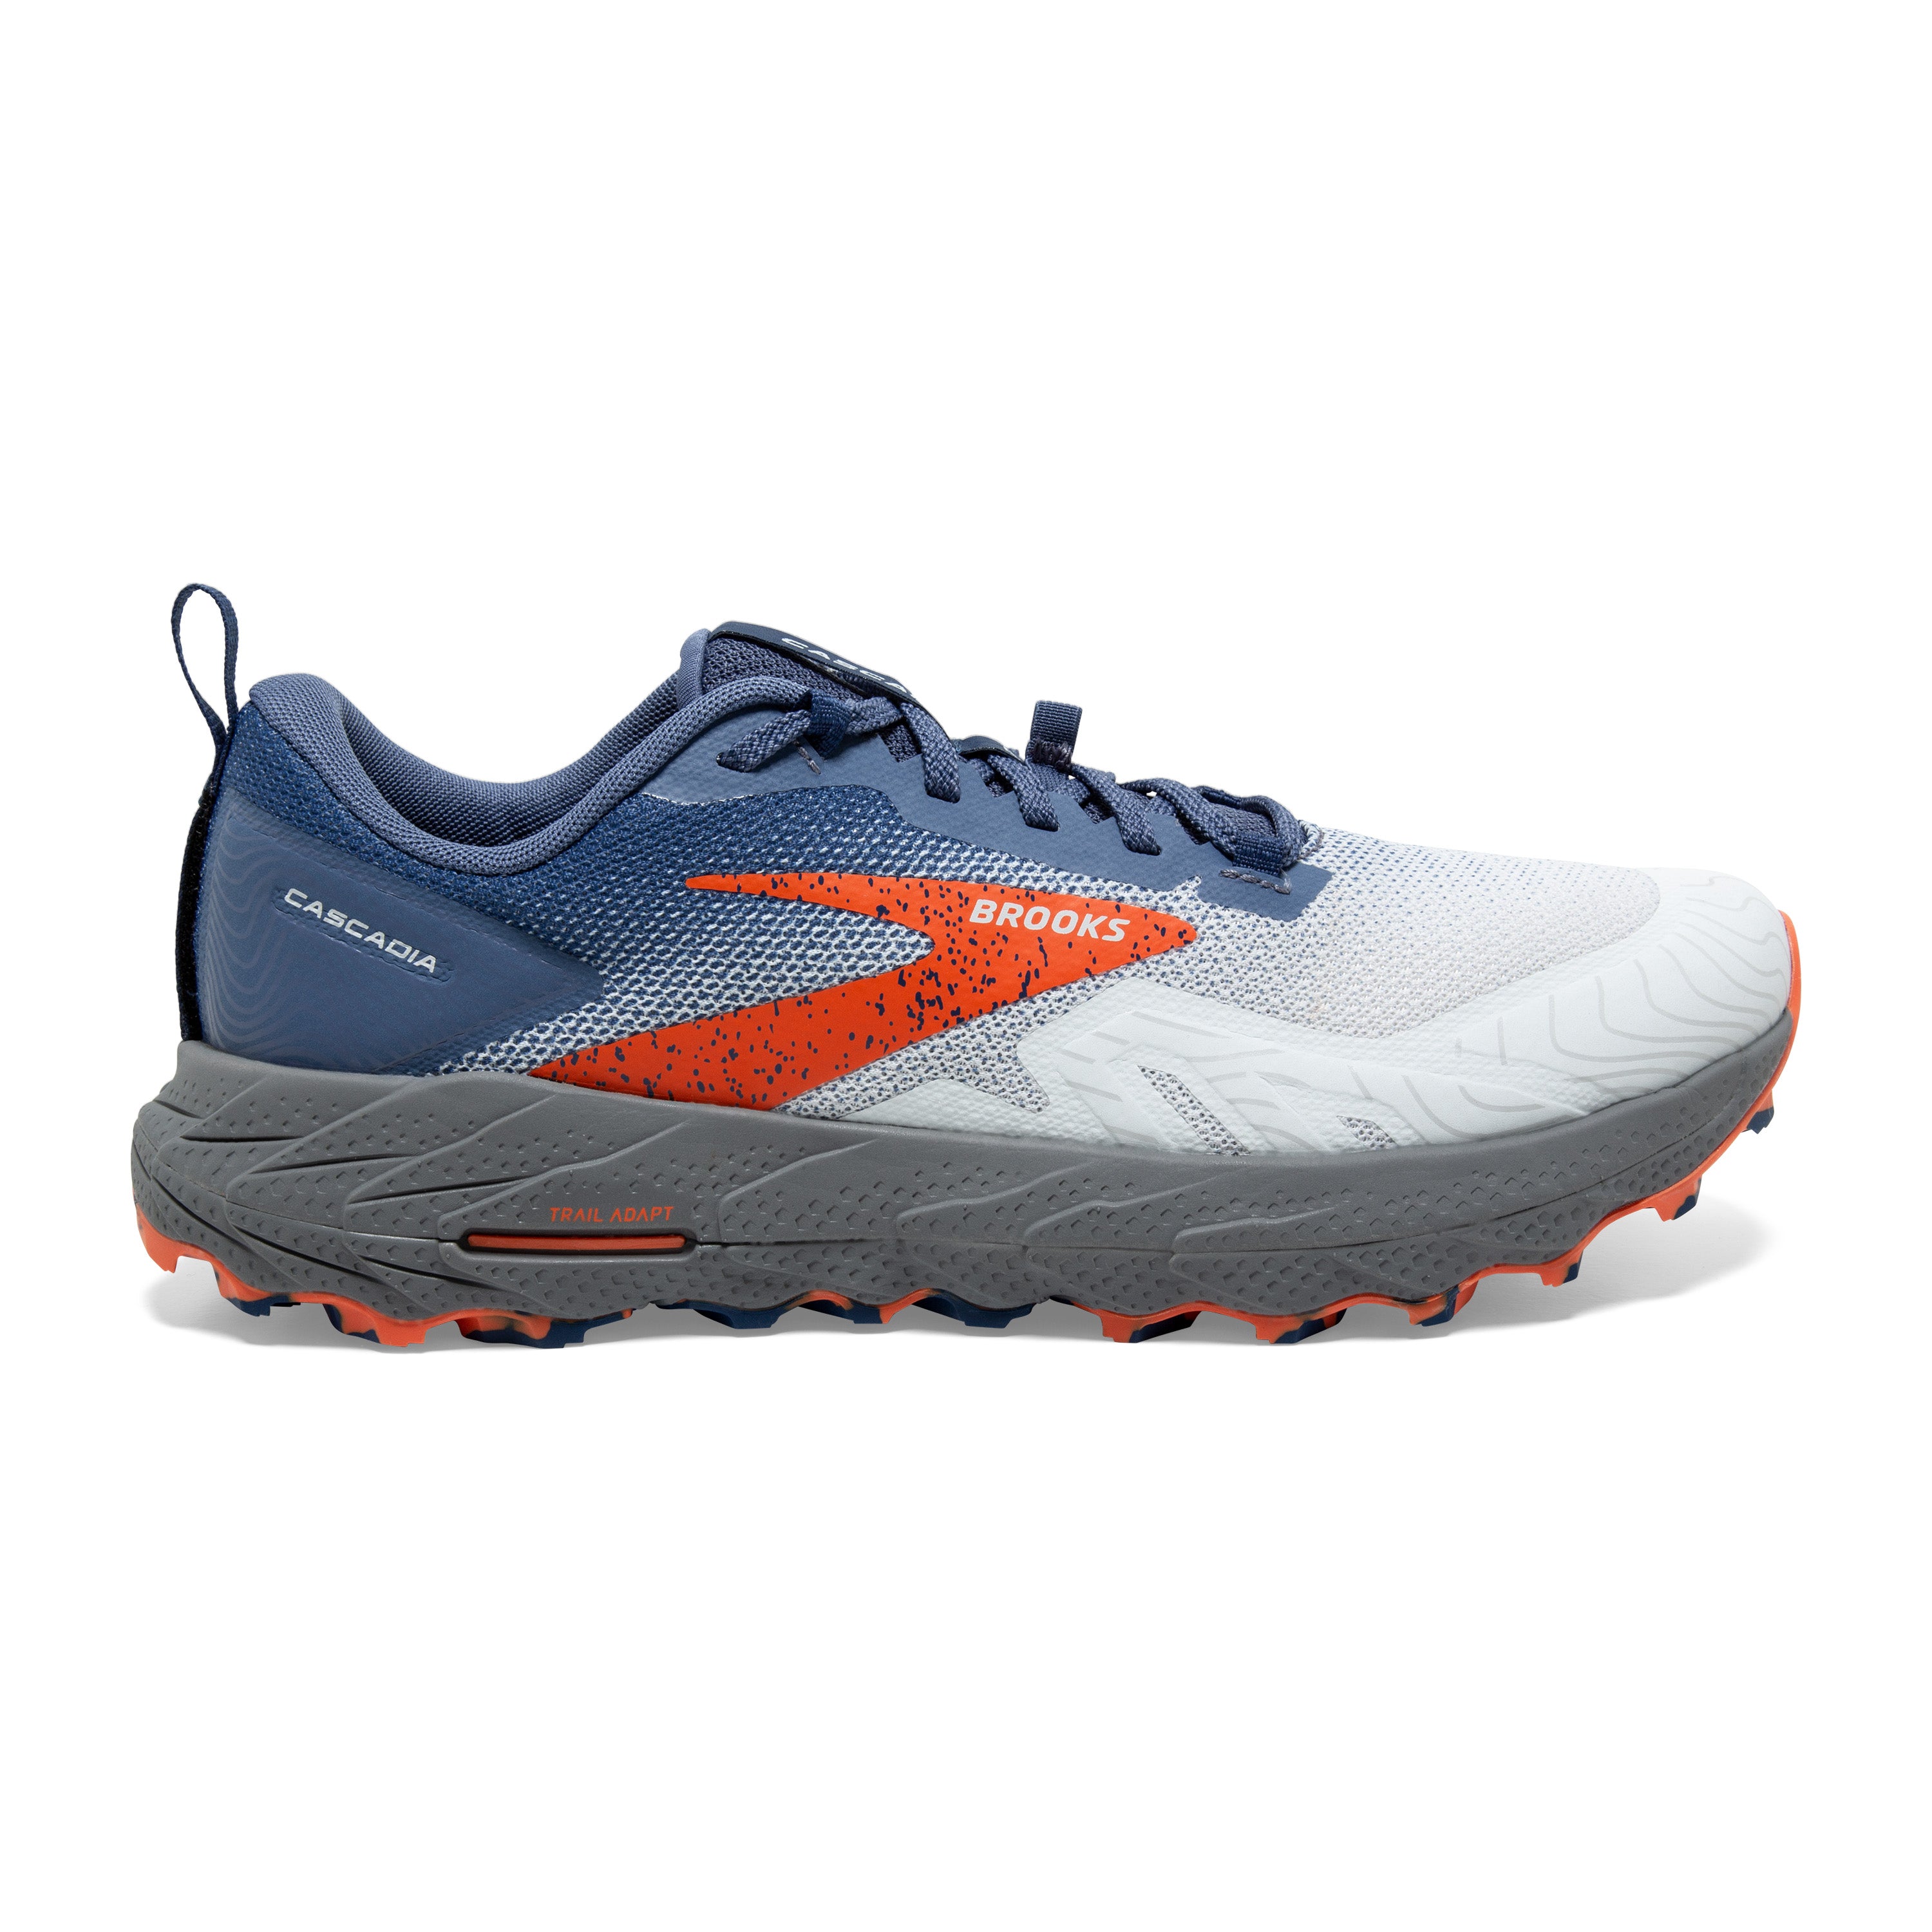 Cascadia 17 - Men's Trail Running Shoes - Wide